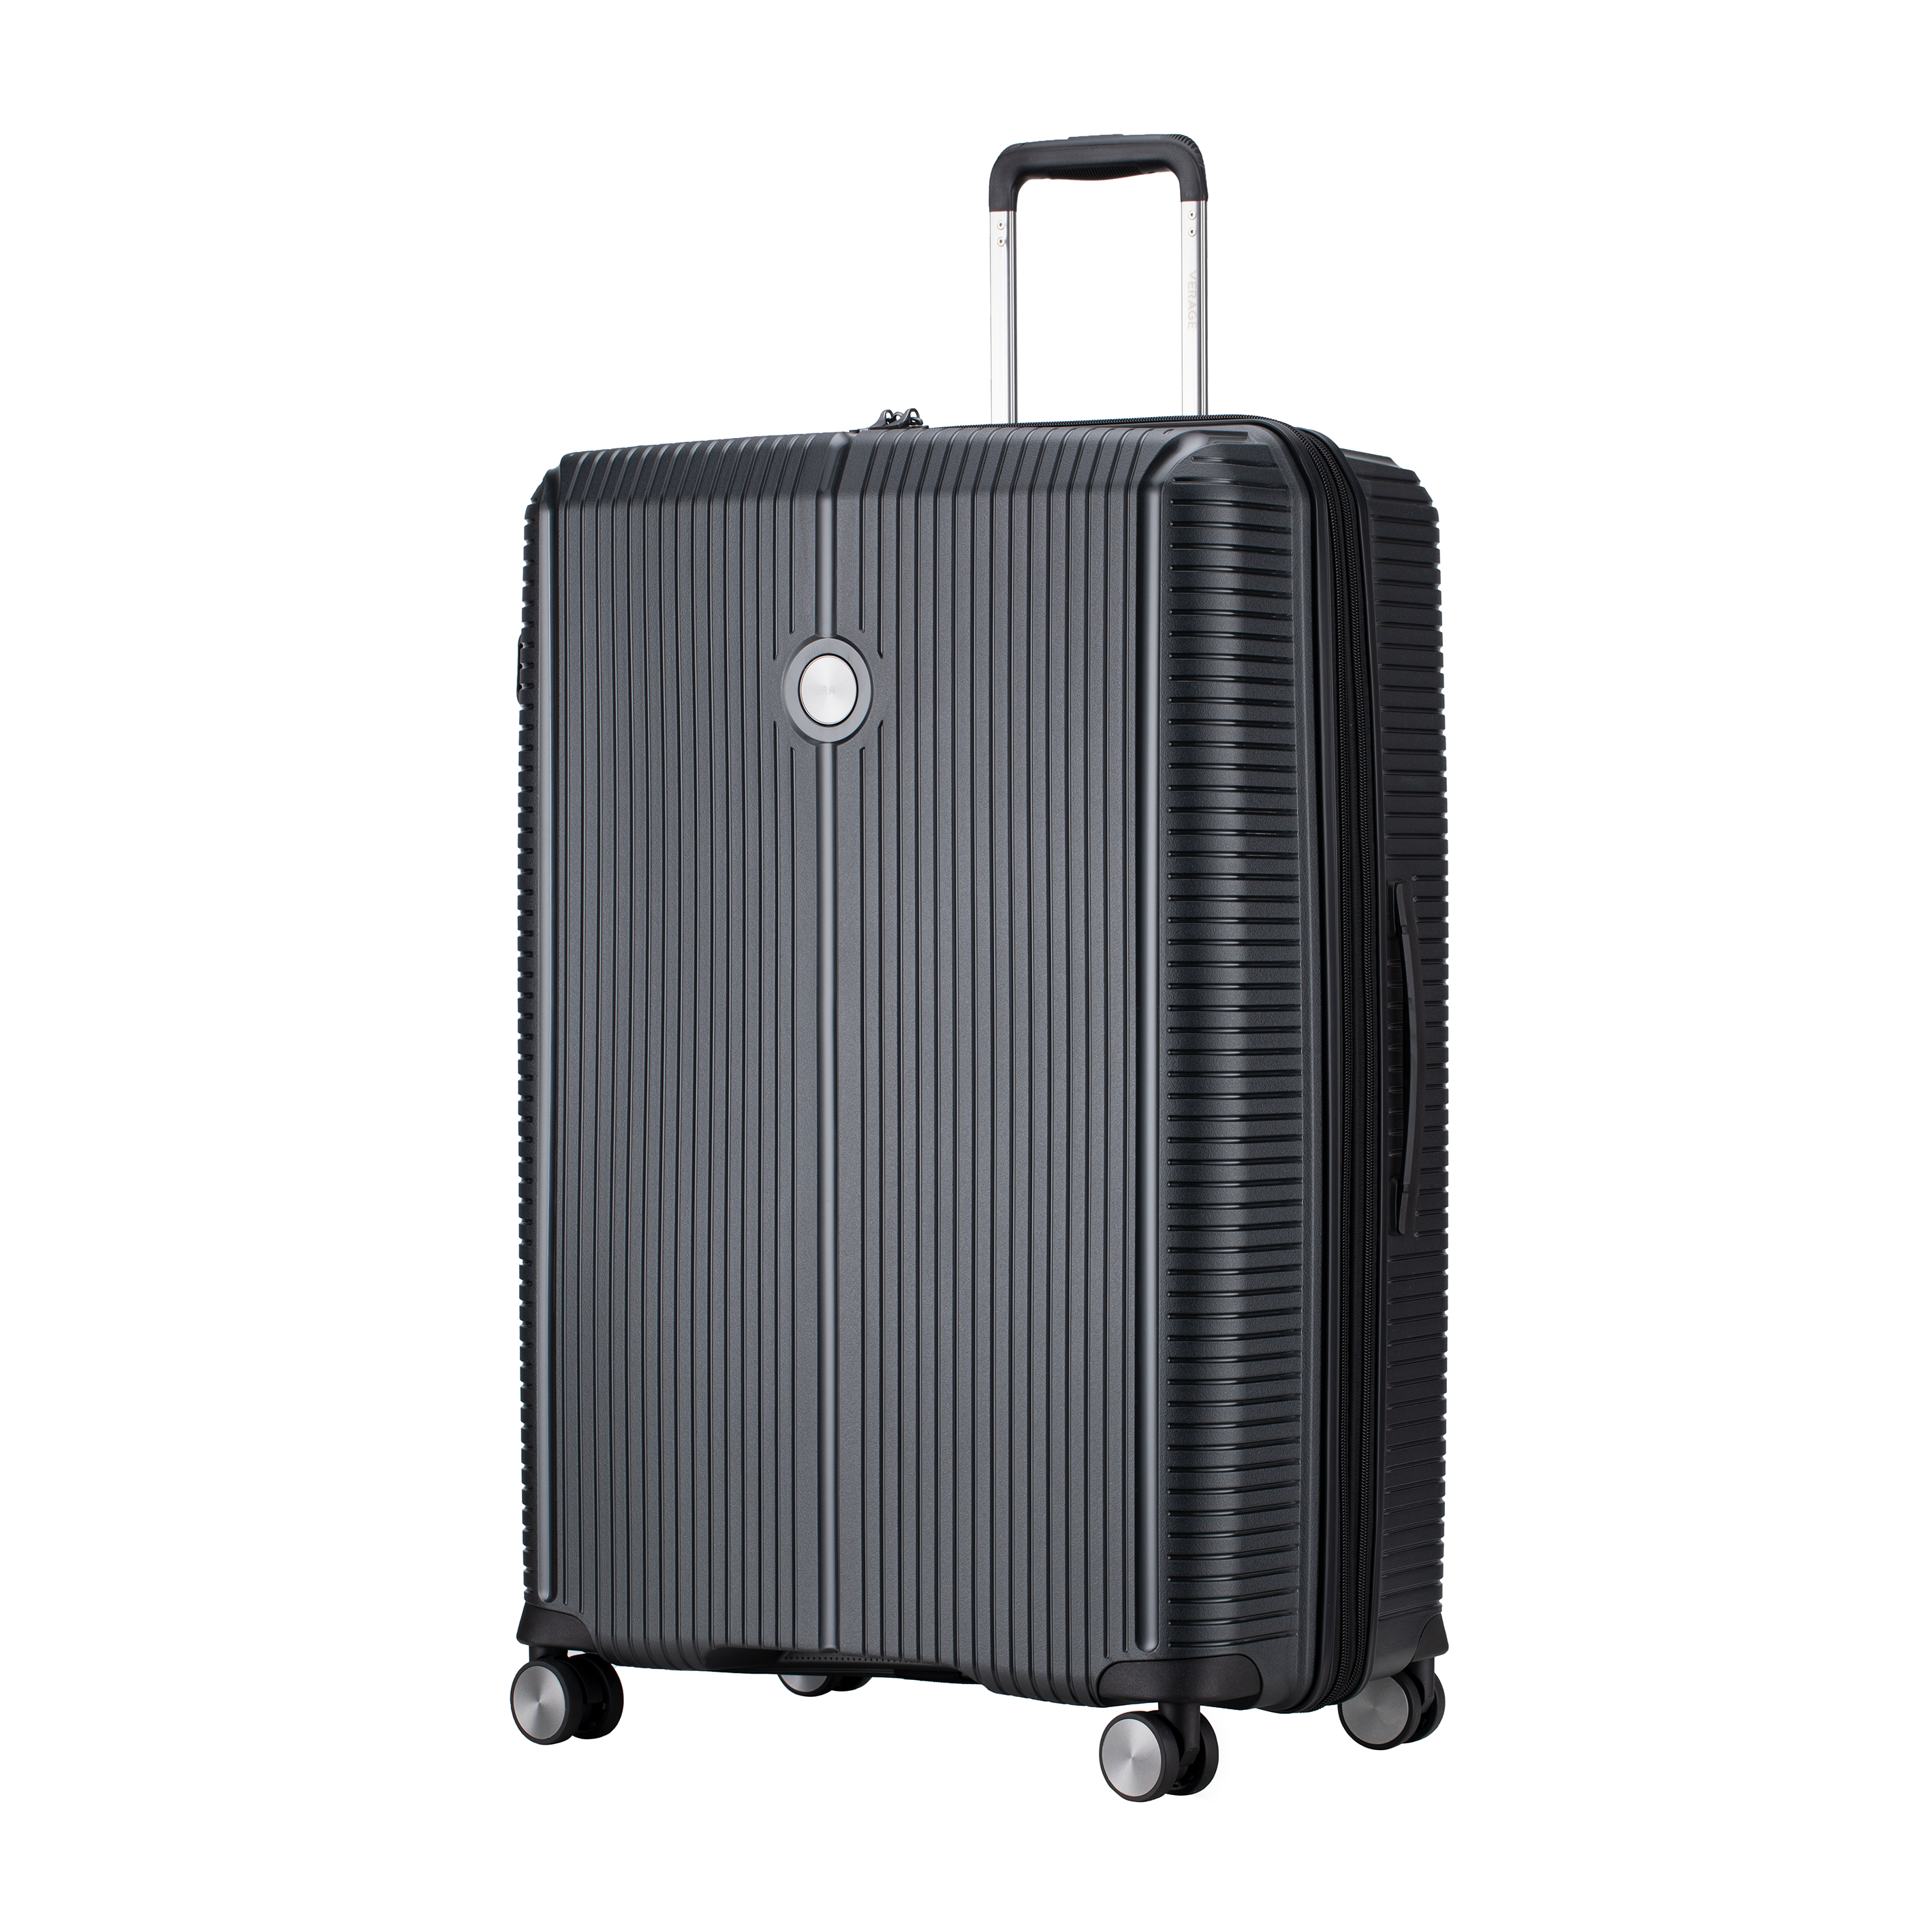 Rome (Large Check-In Suitcase)